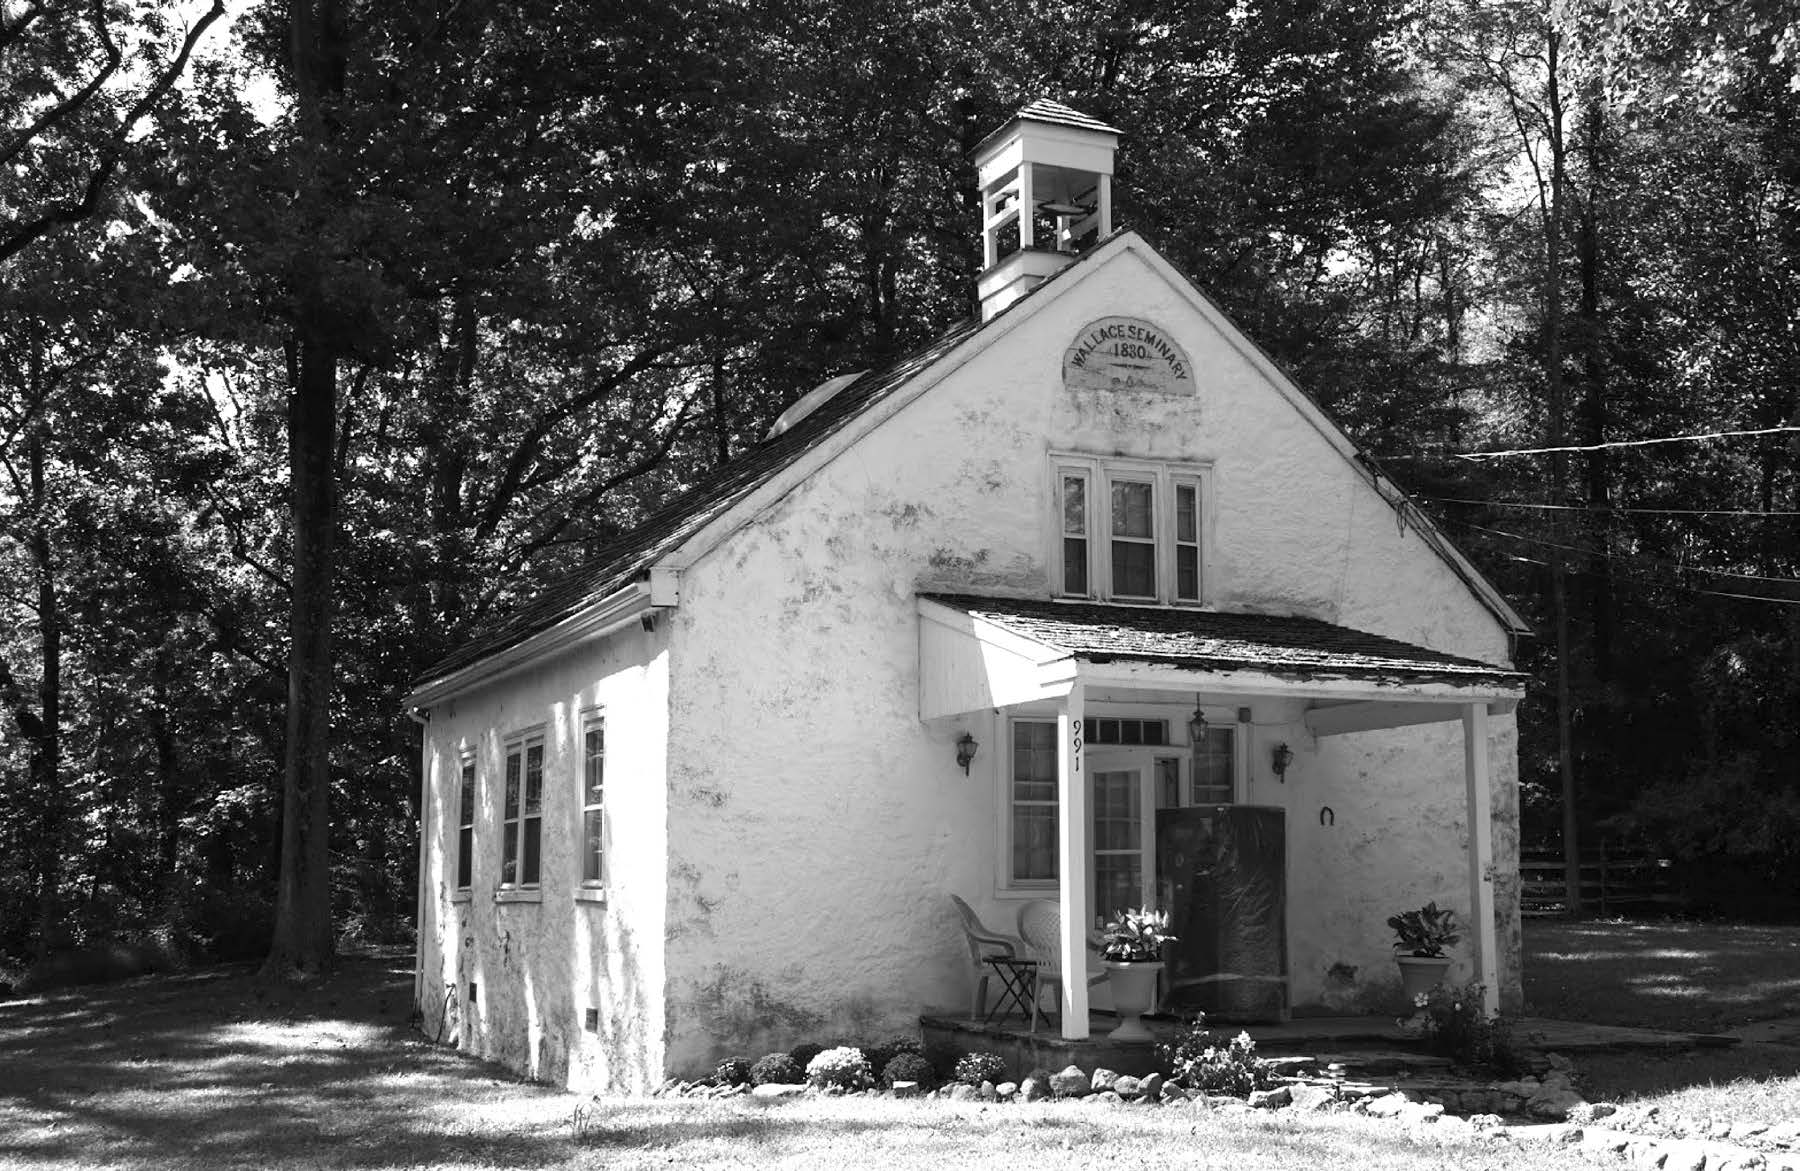 In 1844 the West Nantmeal Seminary in “Mormon Hollow,” Pennsylvania, owned by Latter-day Saint convert Edward Hunter, was the informal headquarters of electioneers in the mid-Atlantic states. 2016 photograph by Nora Moulder.